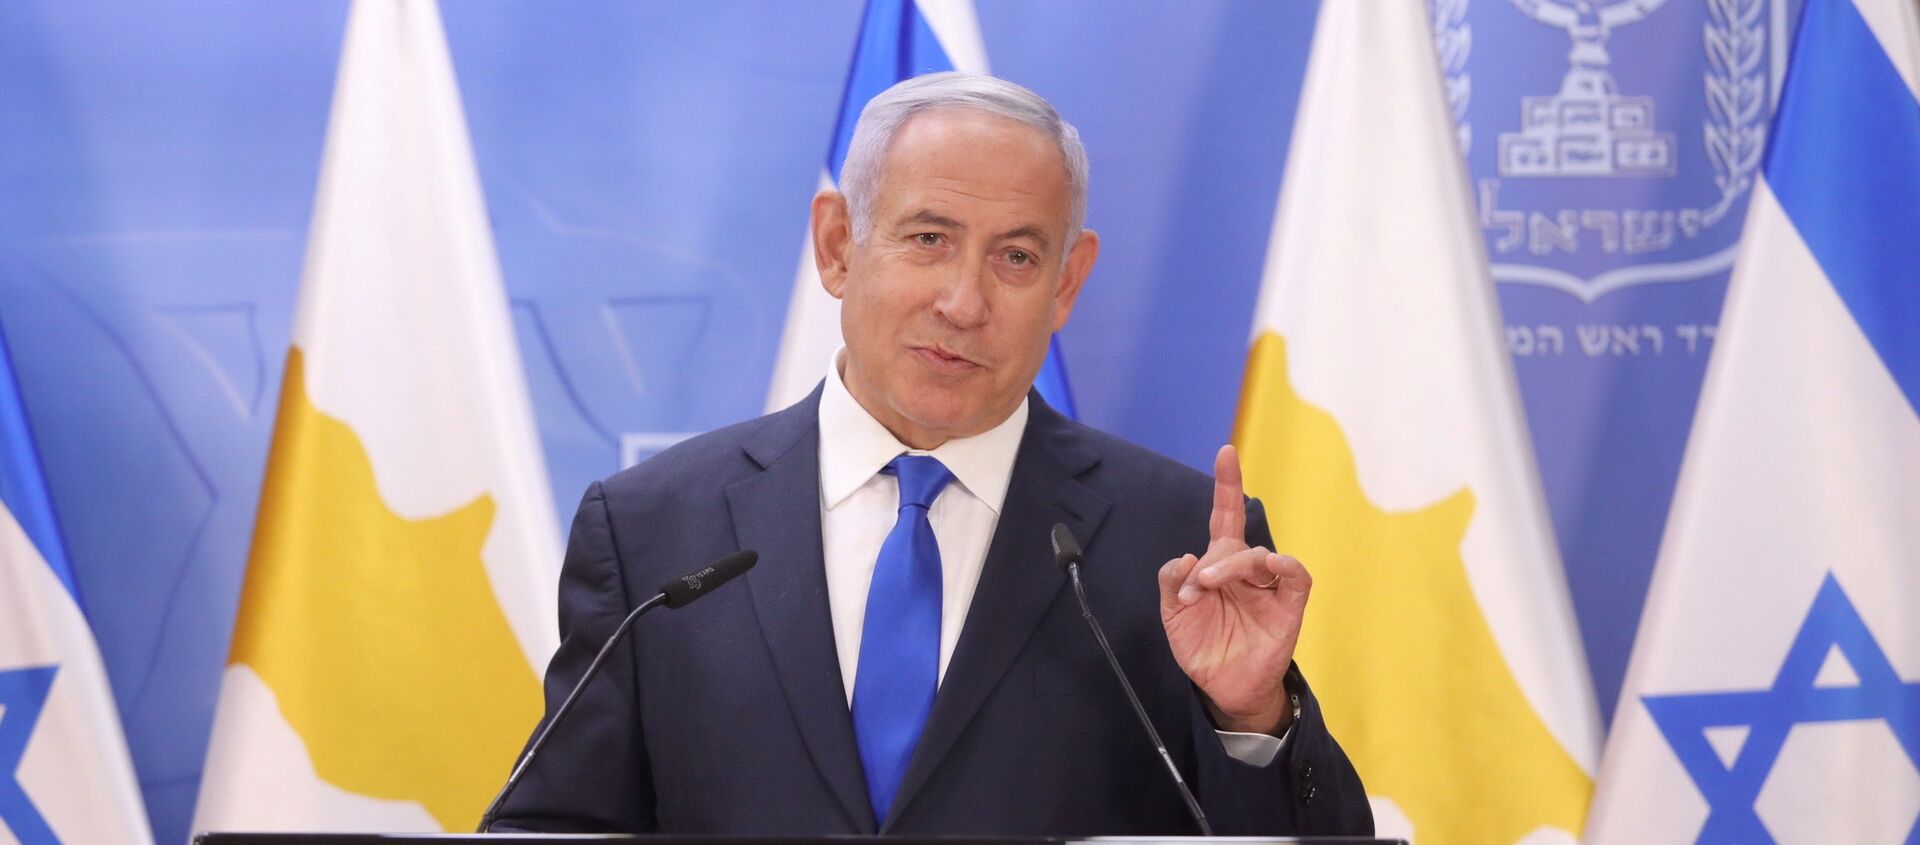 Israeli Prime Minister Benjamin Netanyahu delivers a joint statements with Cypriot President Nicos Anastasiades (not pictured) in Jerusalem February 14, 2021. - Sputnik International, 1920, 19.02.2021